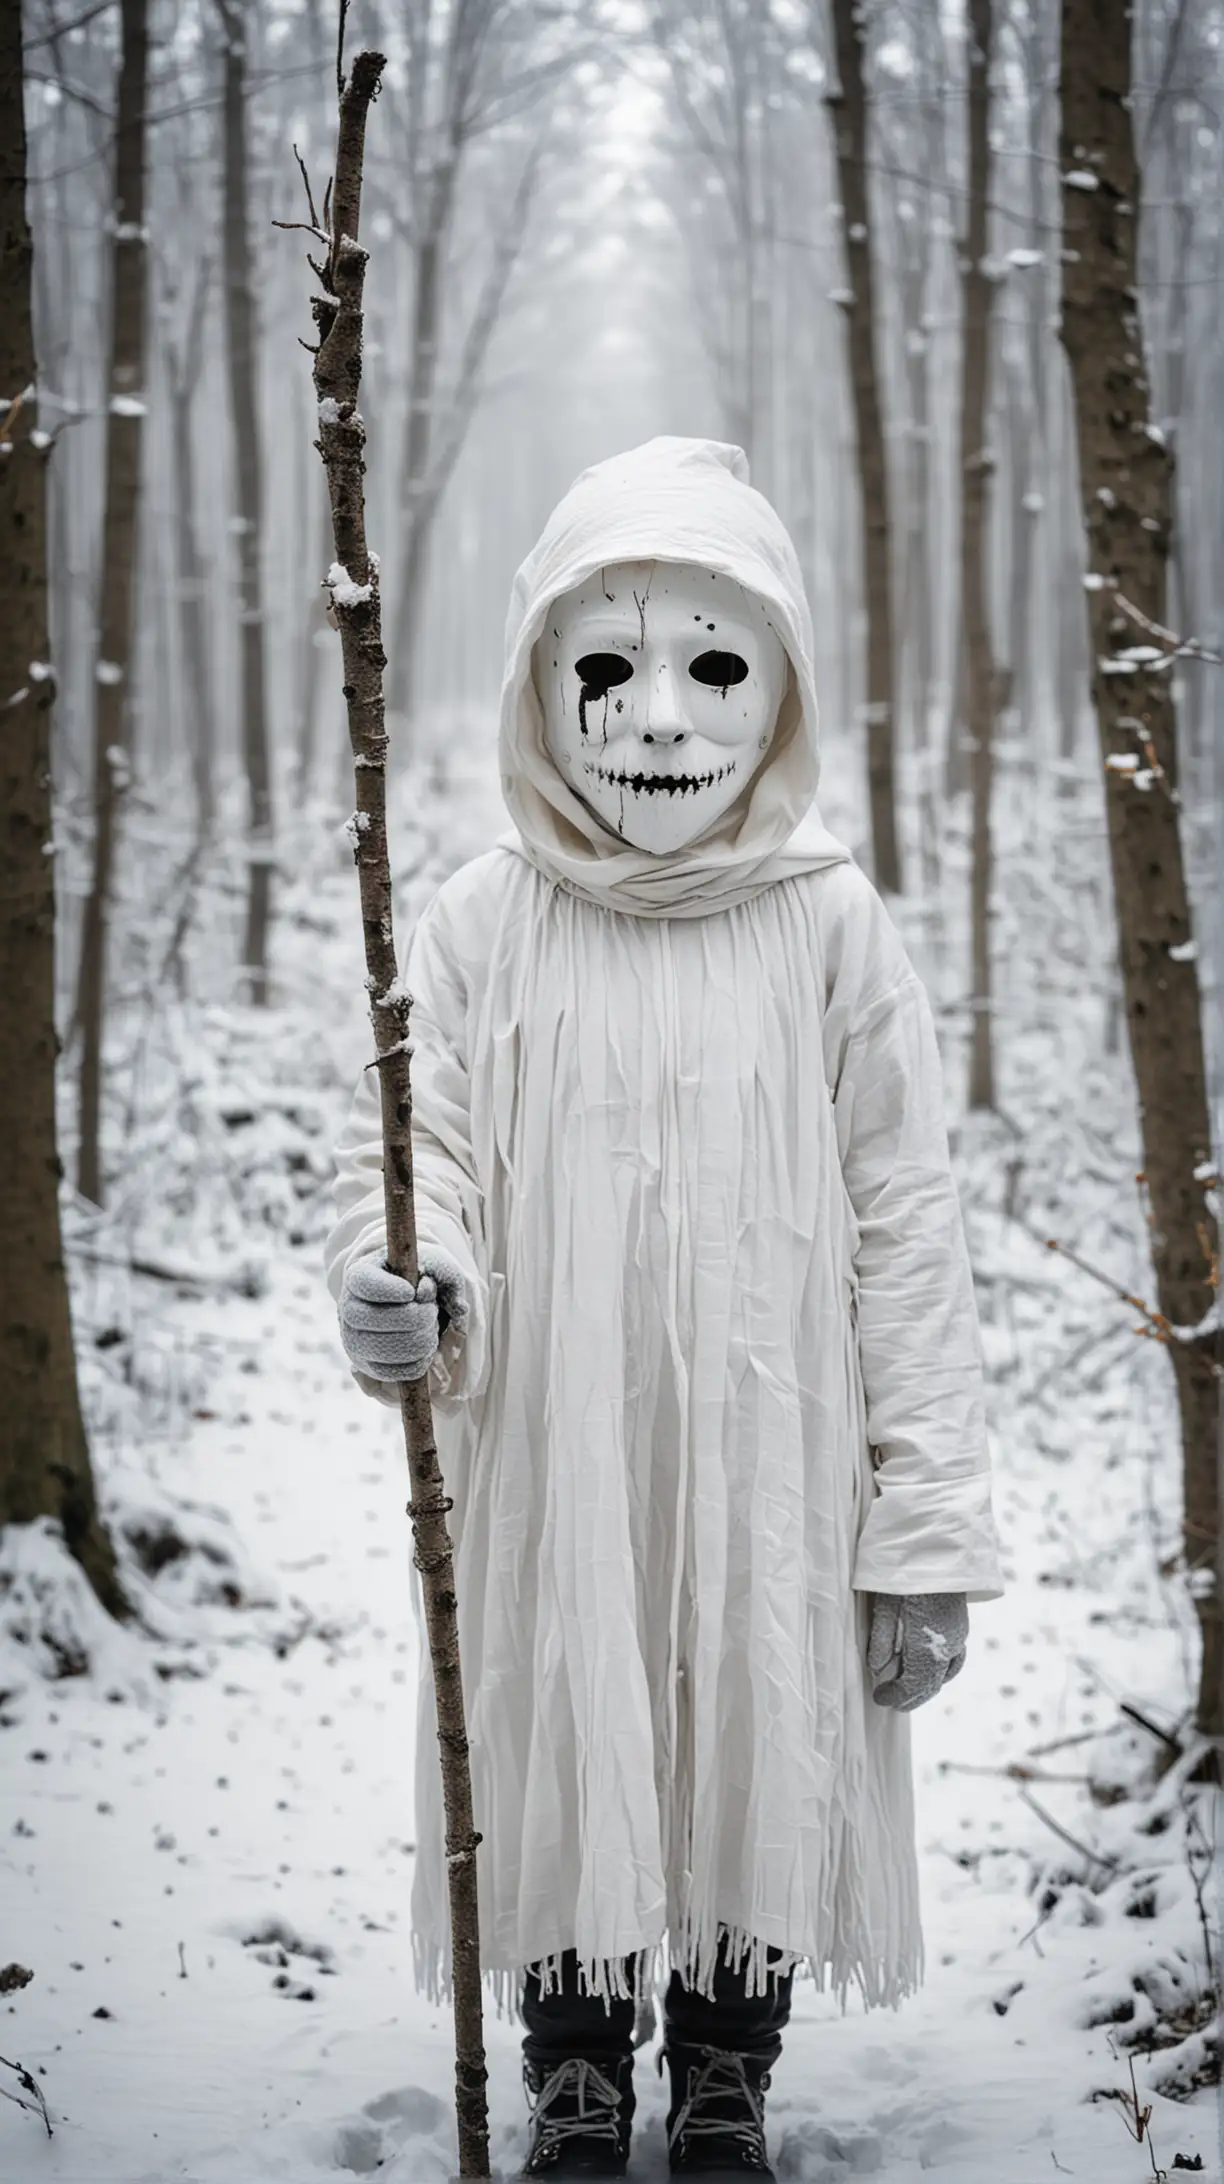 Mysterious Child in Winter Forest with Creepy White Mask